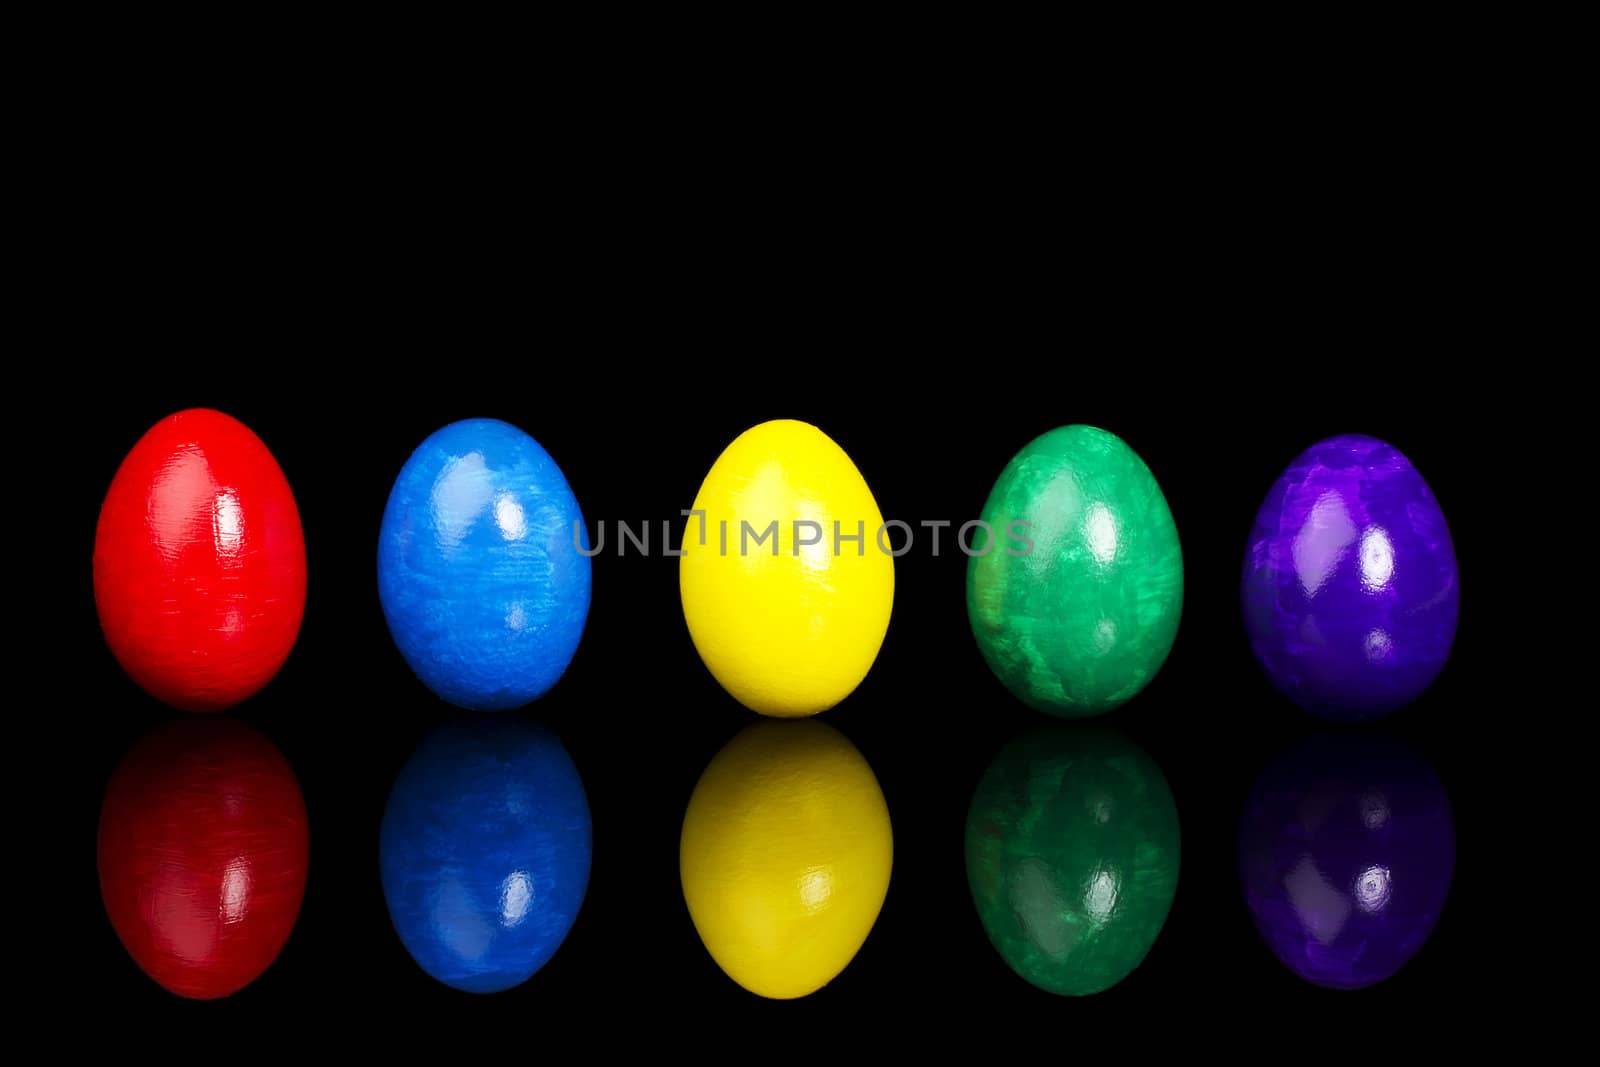 row of five colorful easter eggs on black background with reflection